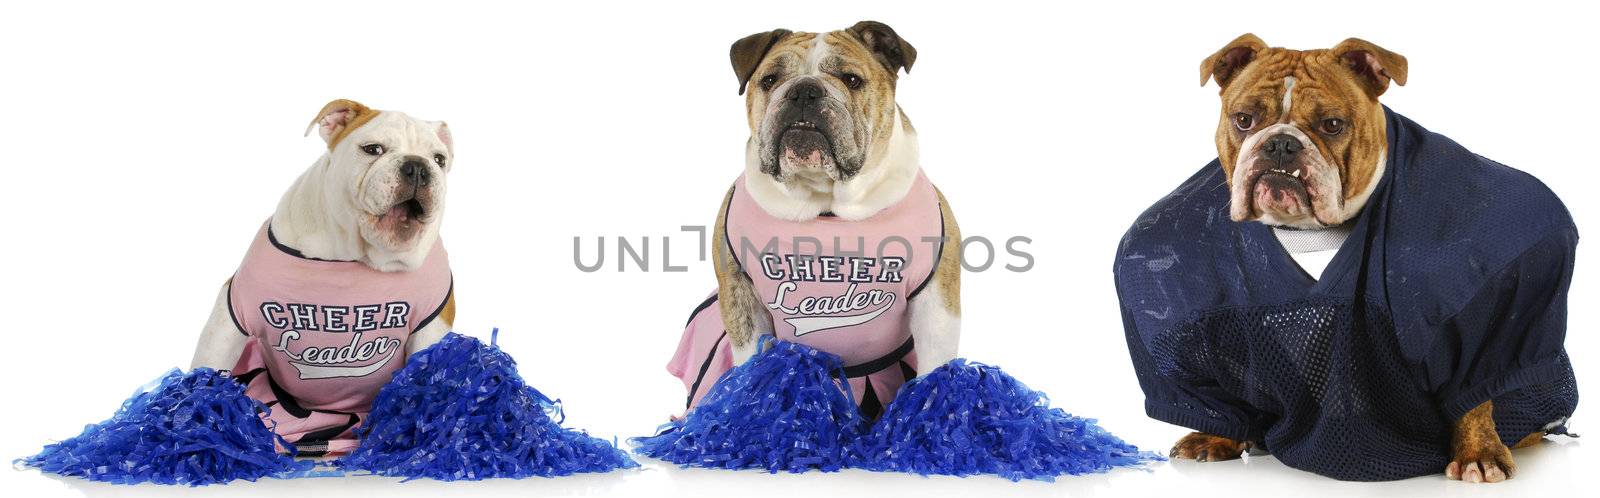 football player and cheerleaders - english bulldogs dressed in costumes